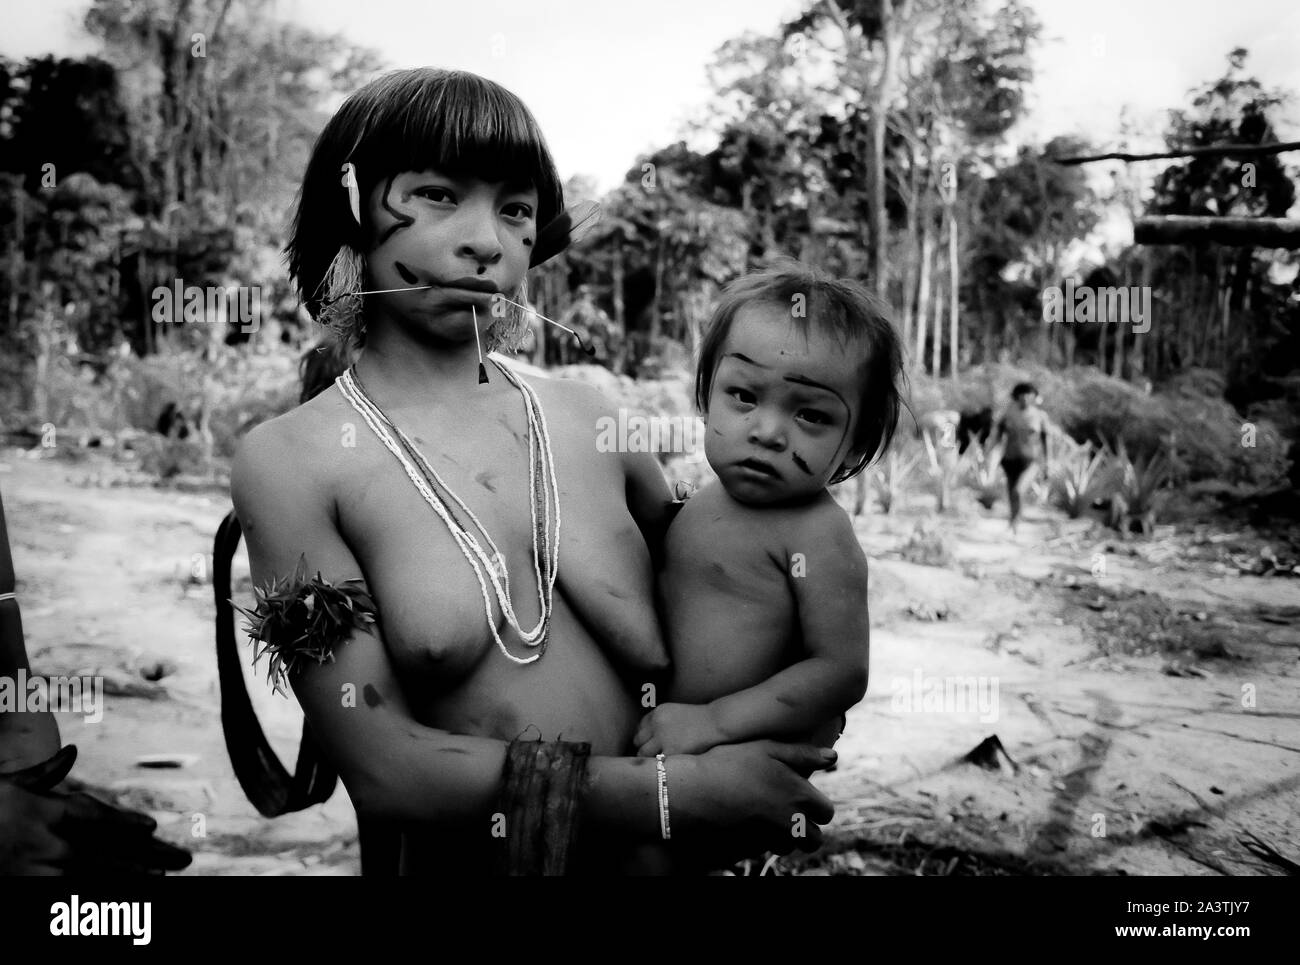 Yanomami High Resolution Stock Photography And Images Alamy In australia, alamy.com is ranked 40,520, with an estimated 322,442 monthly visitors a month. https www alamy com brazil amazonia roraima a young yanomai woman with her son in her arms image329382683 html